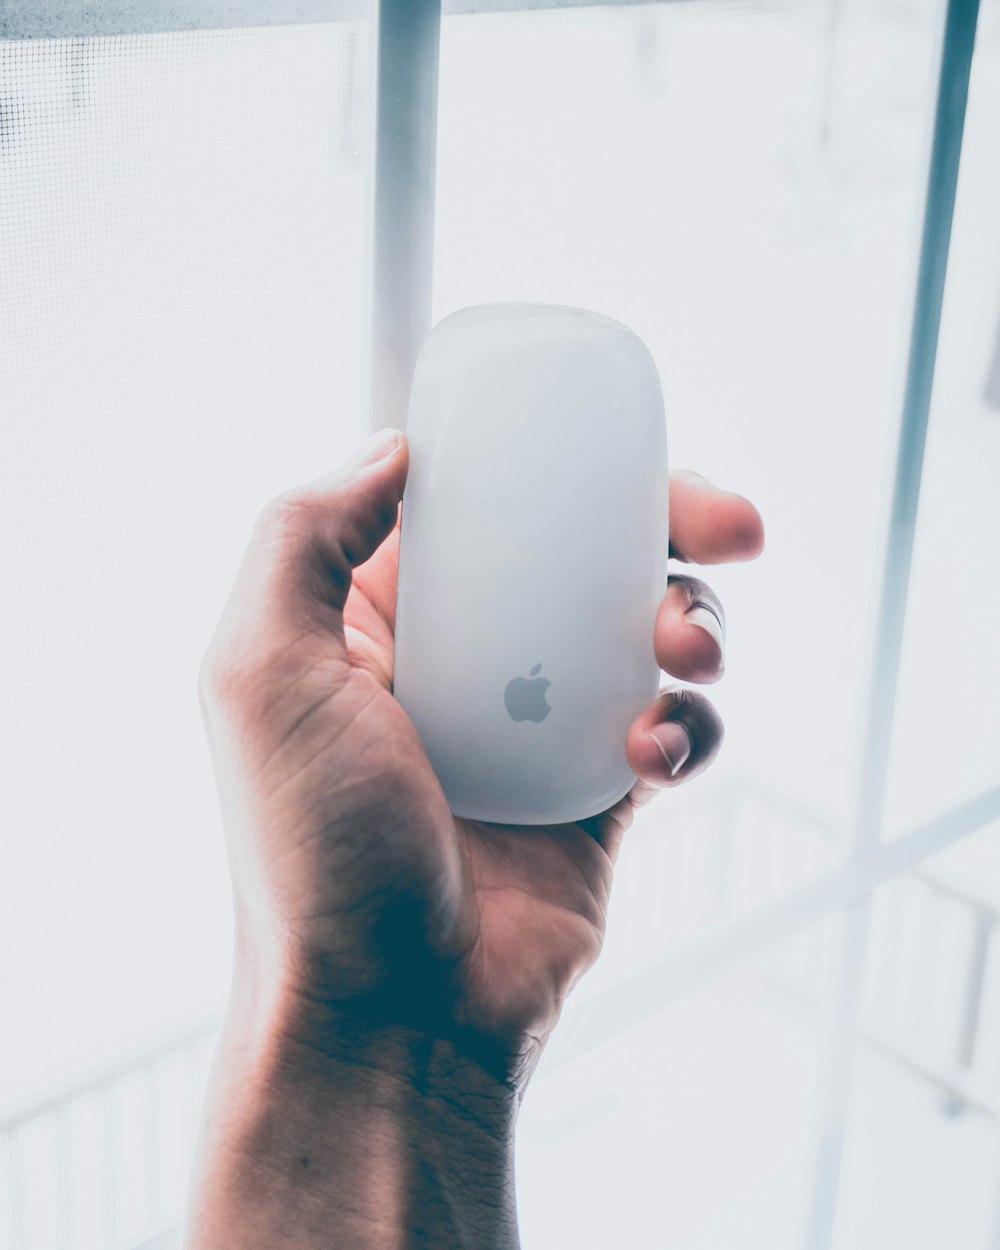 person holding Apple Magic mouse